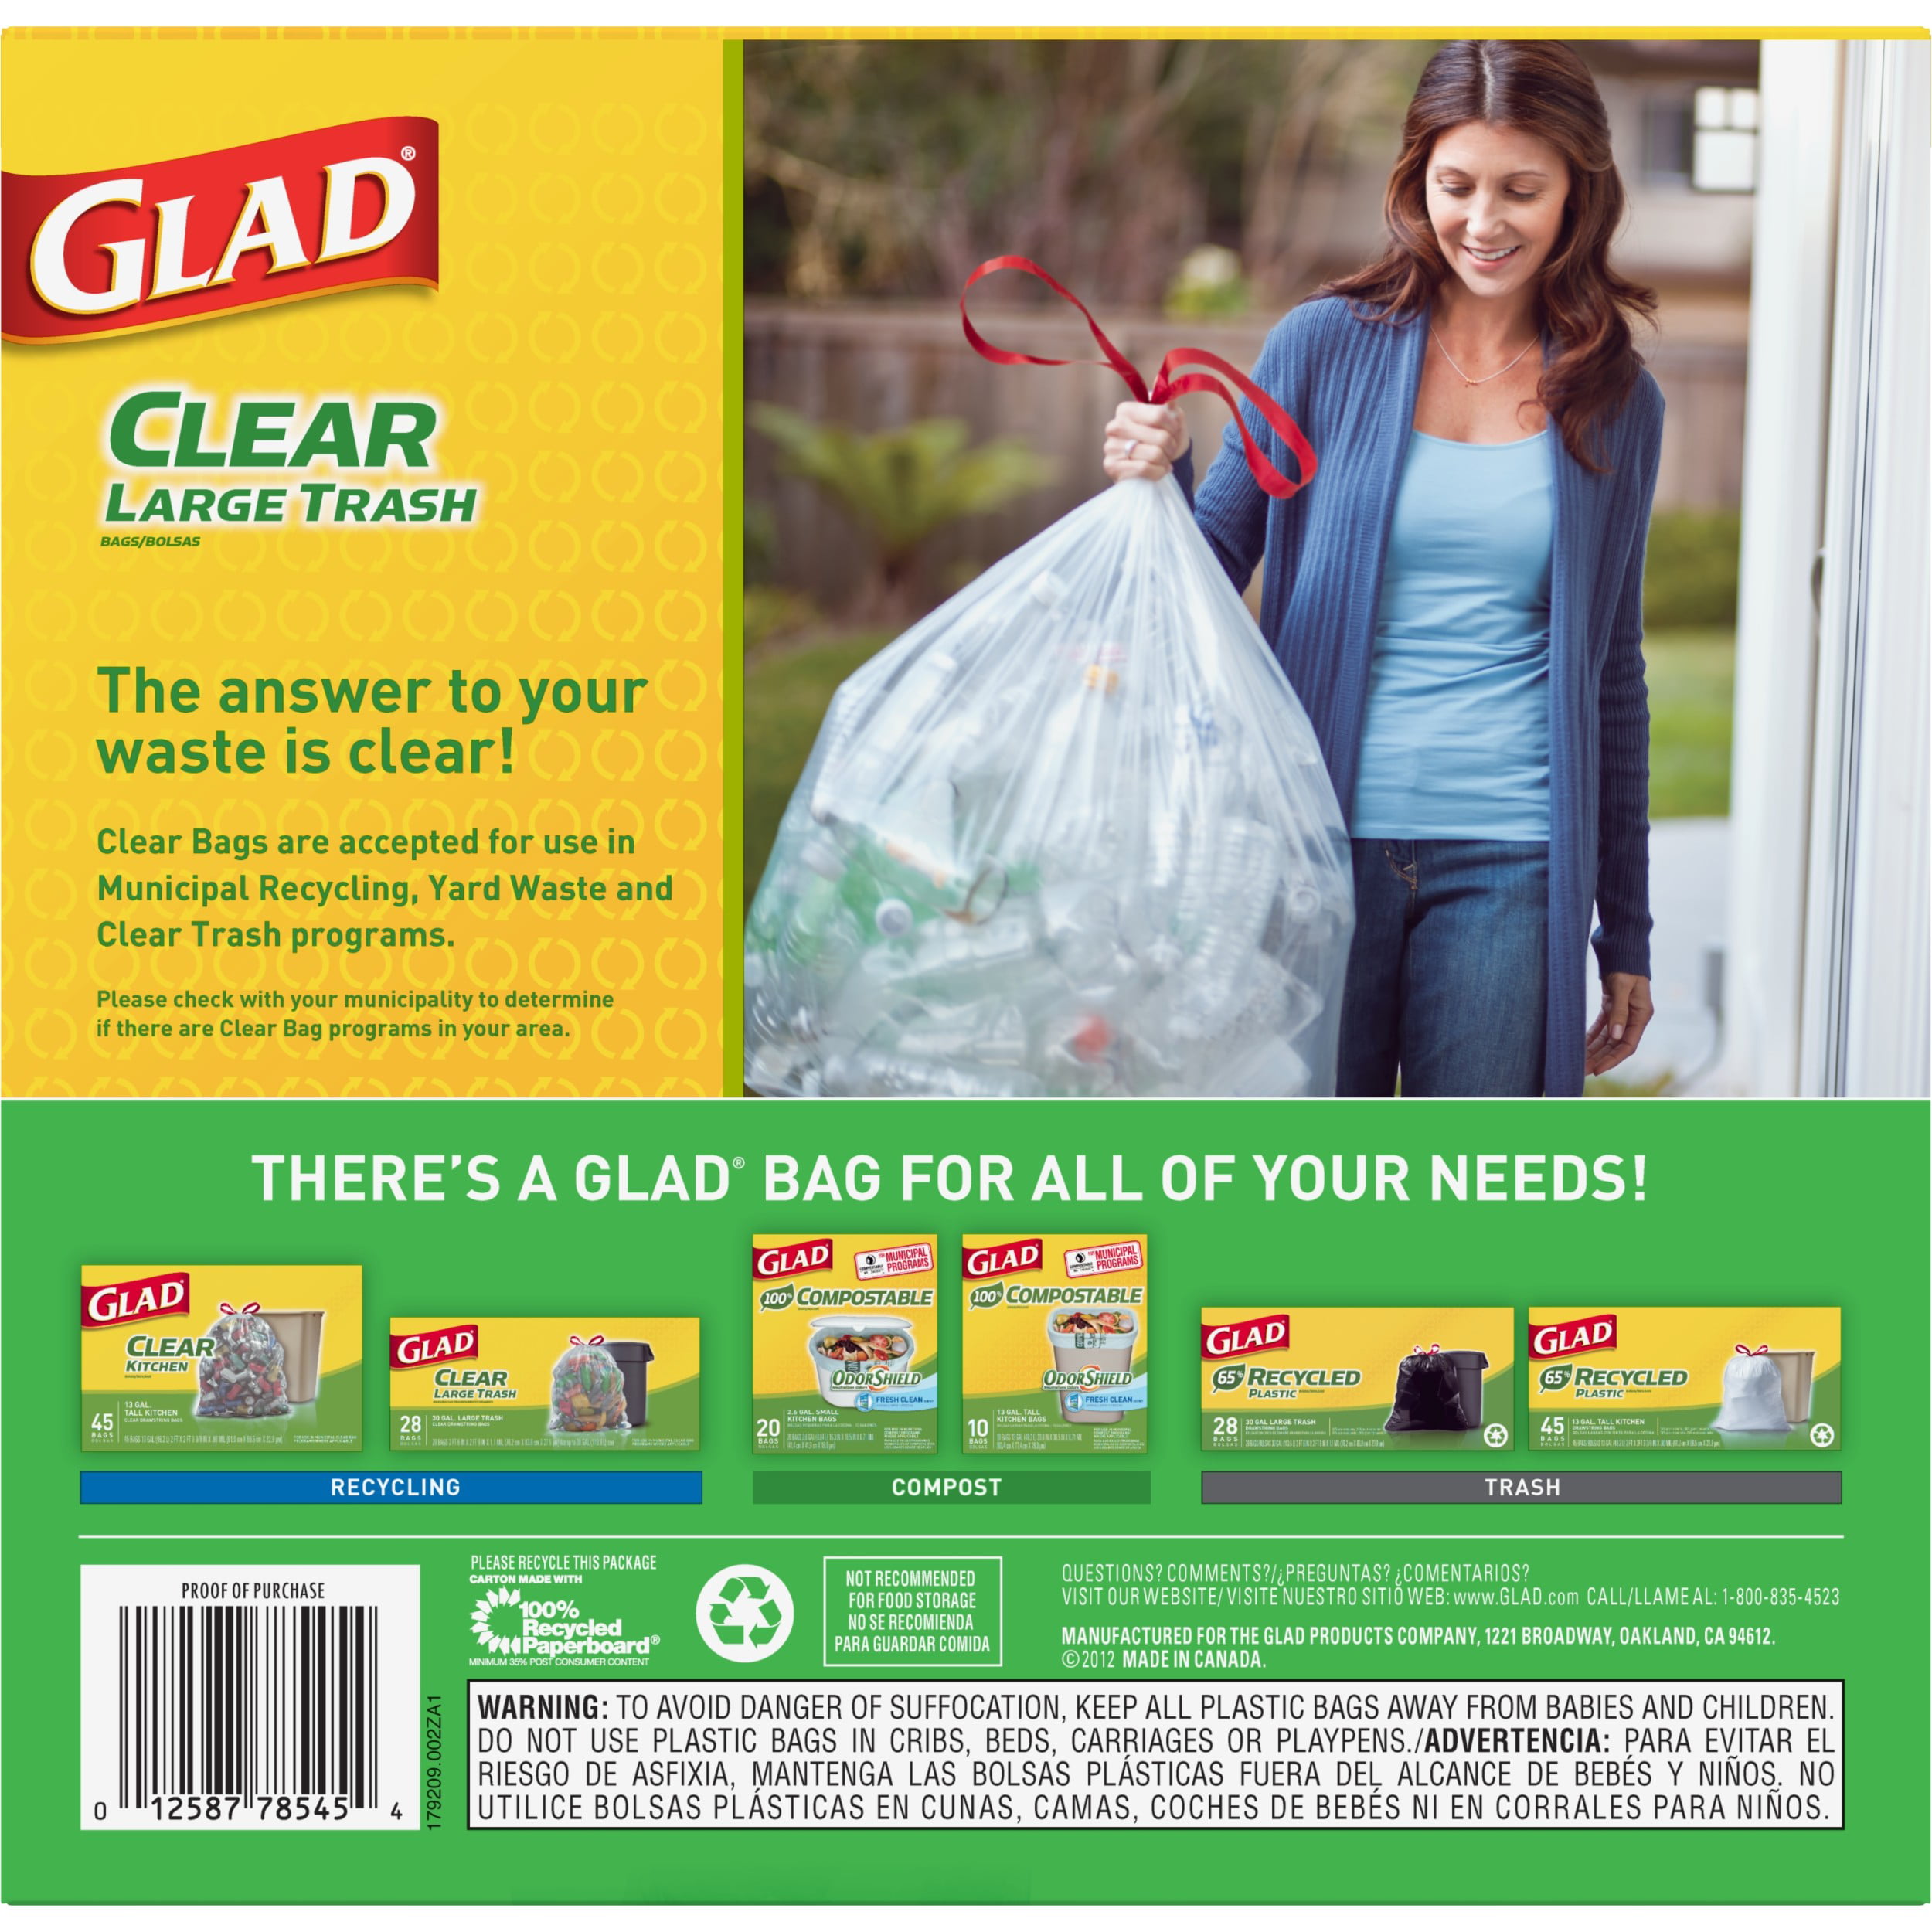 Pekky 30 Gallon Clear Large Trash Bags (Lawn and Leaf), 70 Counts